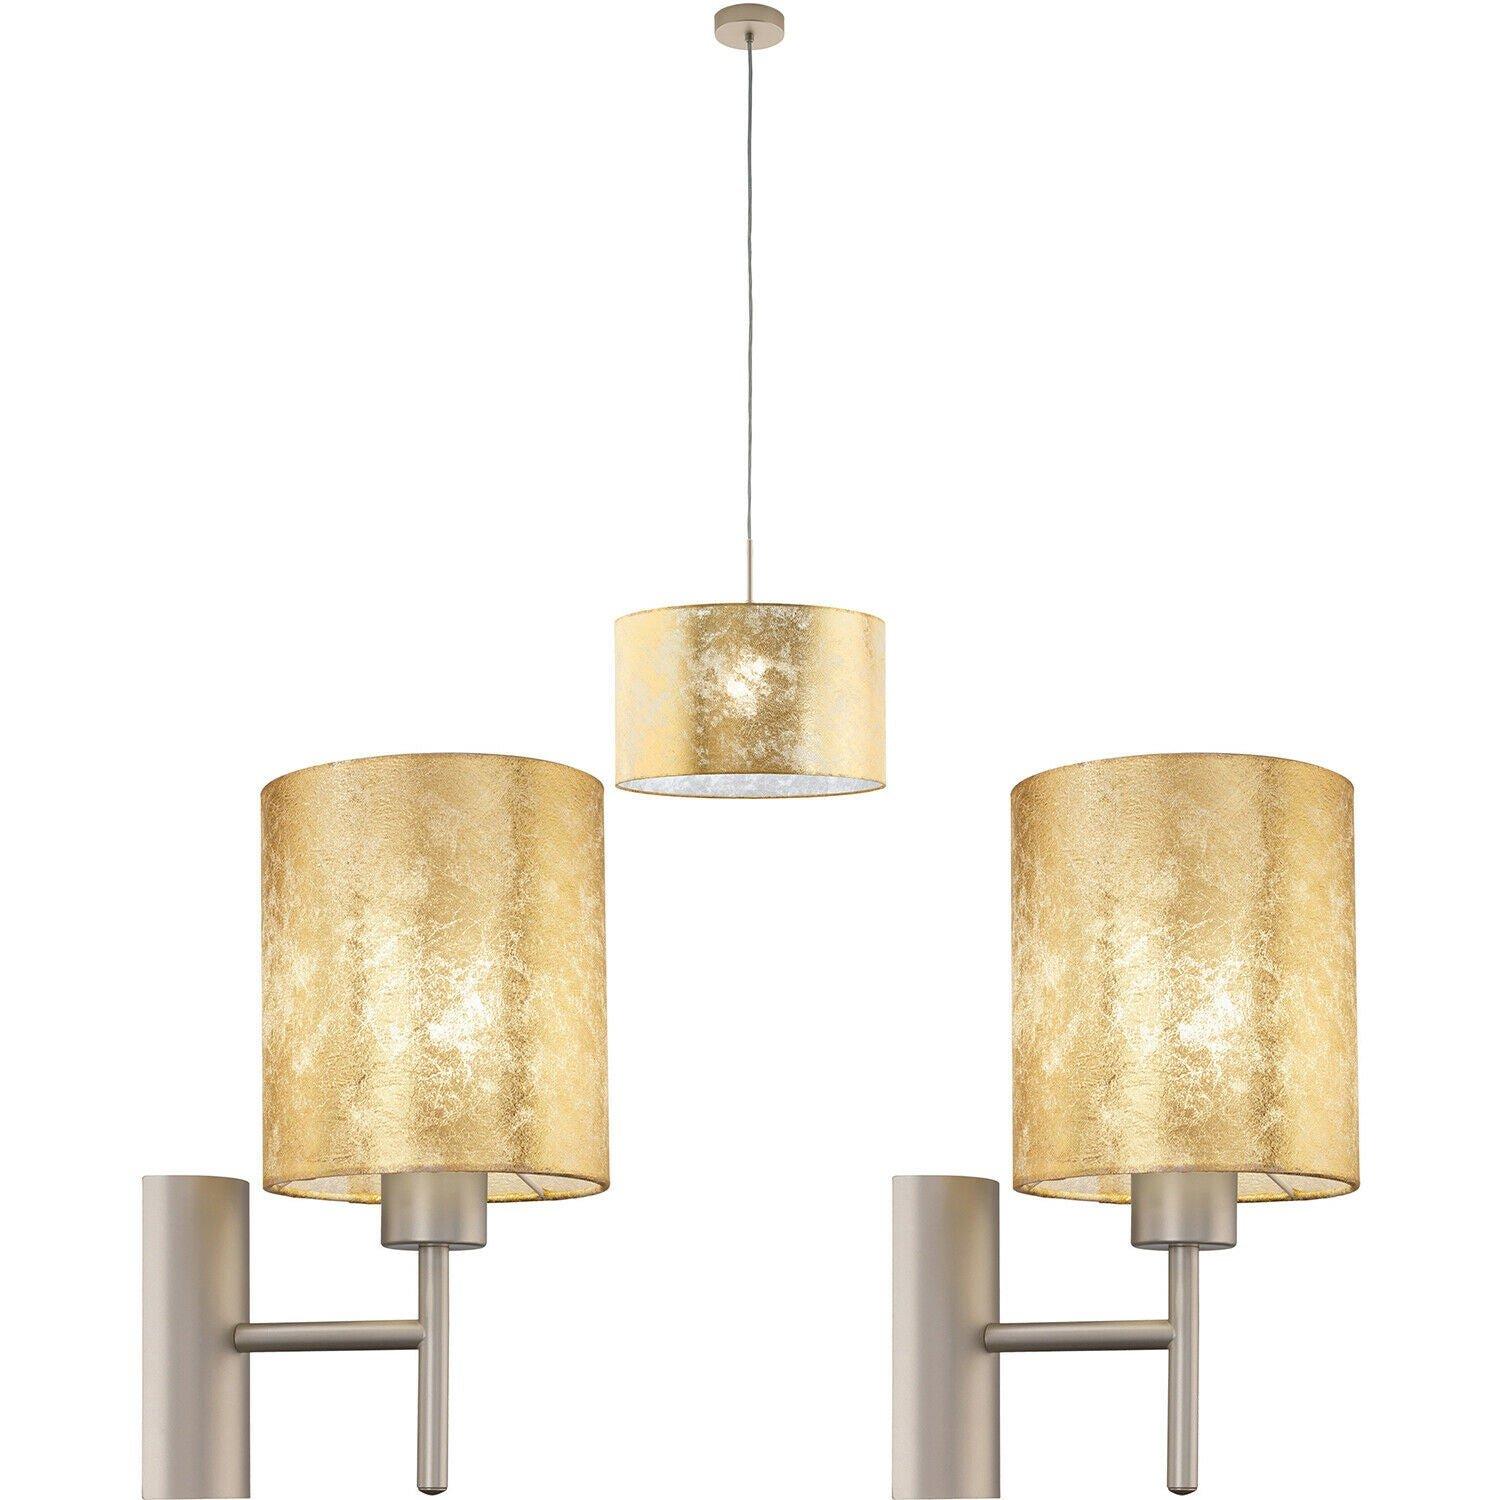 Ceiling Pendant Light & 2x Matching Wall Lights Champagne & Gold Fabric Shade